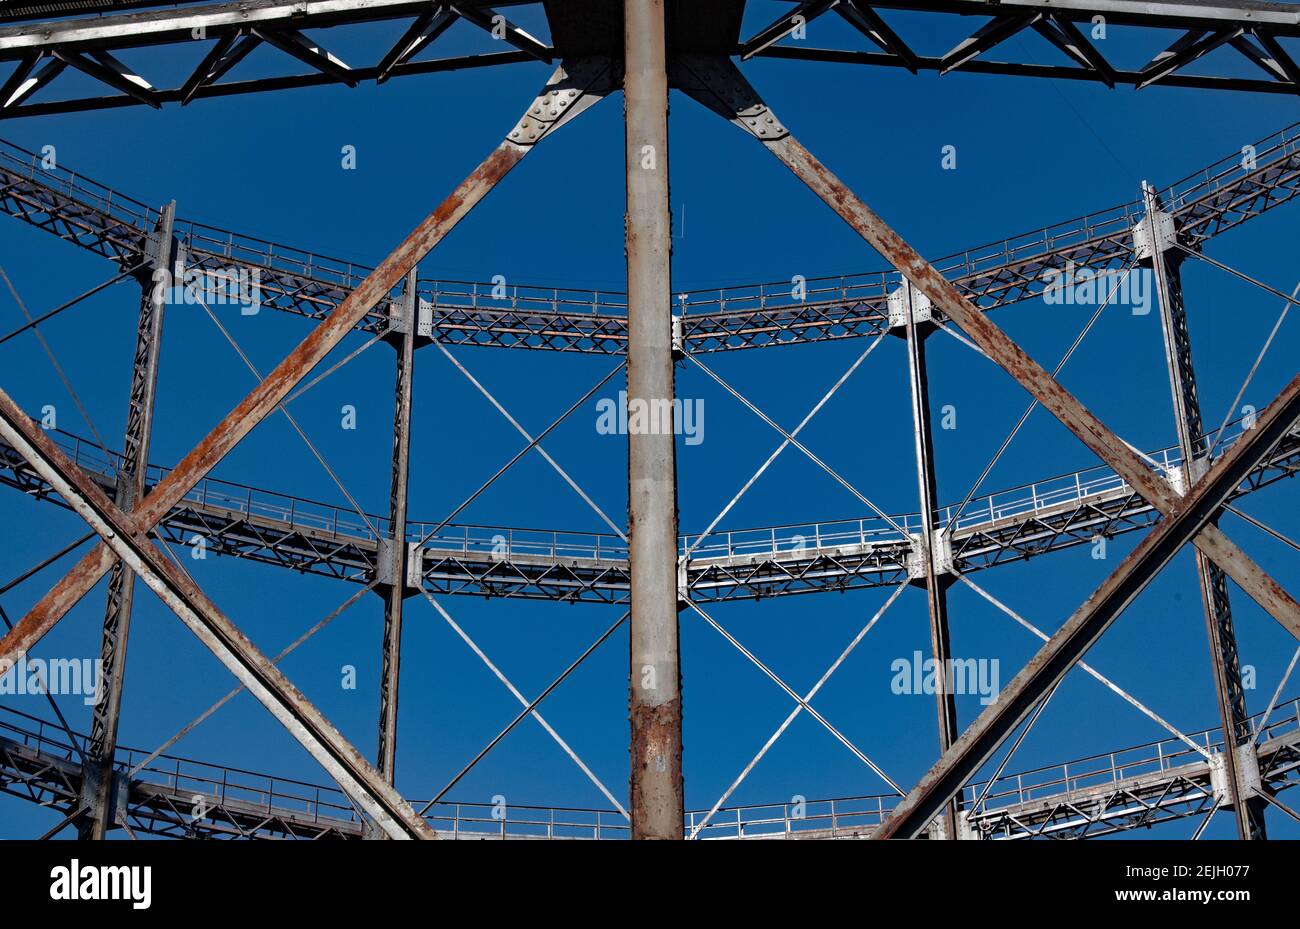 Berlin, Germany. 22nd Feb, 2021. View through struts of the gasometer to blue sky. The participation procedure for the conversion of the listed Gasometer ends on 24 February. If the owner has his way, the over 100-year-old steel construction is to be given a new lease of life as the shell of an office building. However, a citizens' initiative wants to prevent this and is calling for signatures on a petition. Credit: Paul Zinken/dpa-Zentralbild/ZB/dpa/Alamy Live News Stock Photo